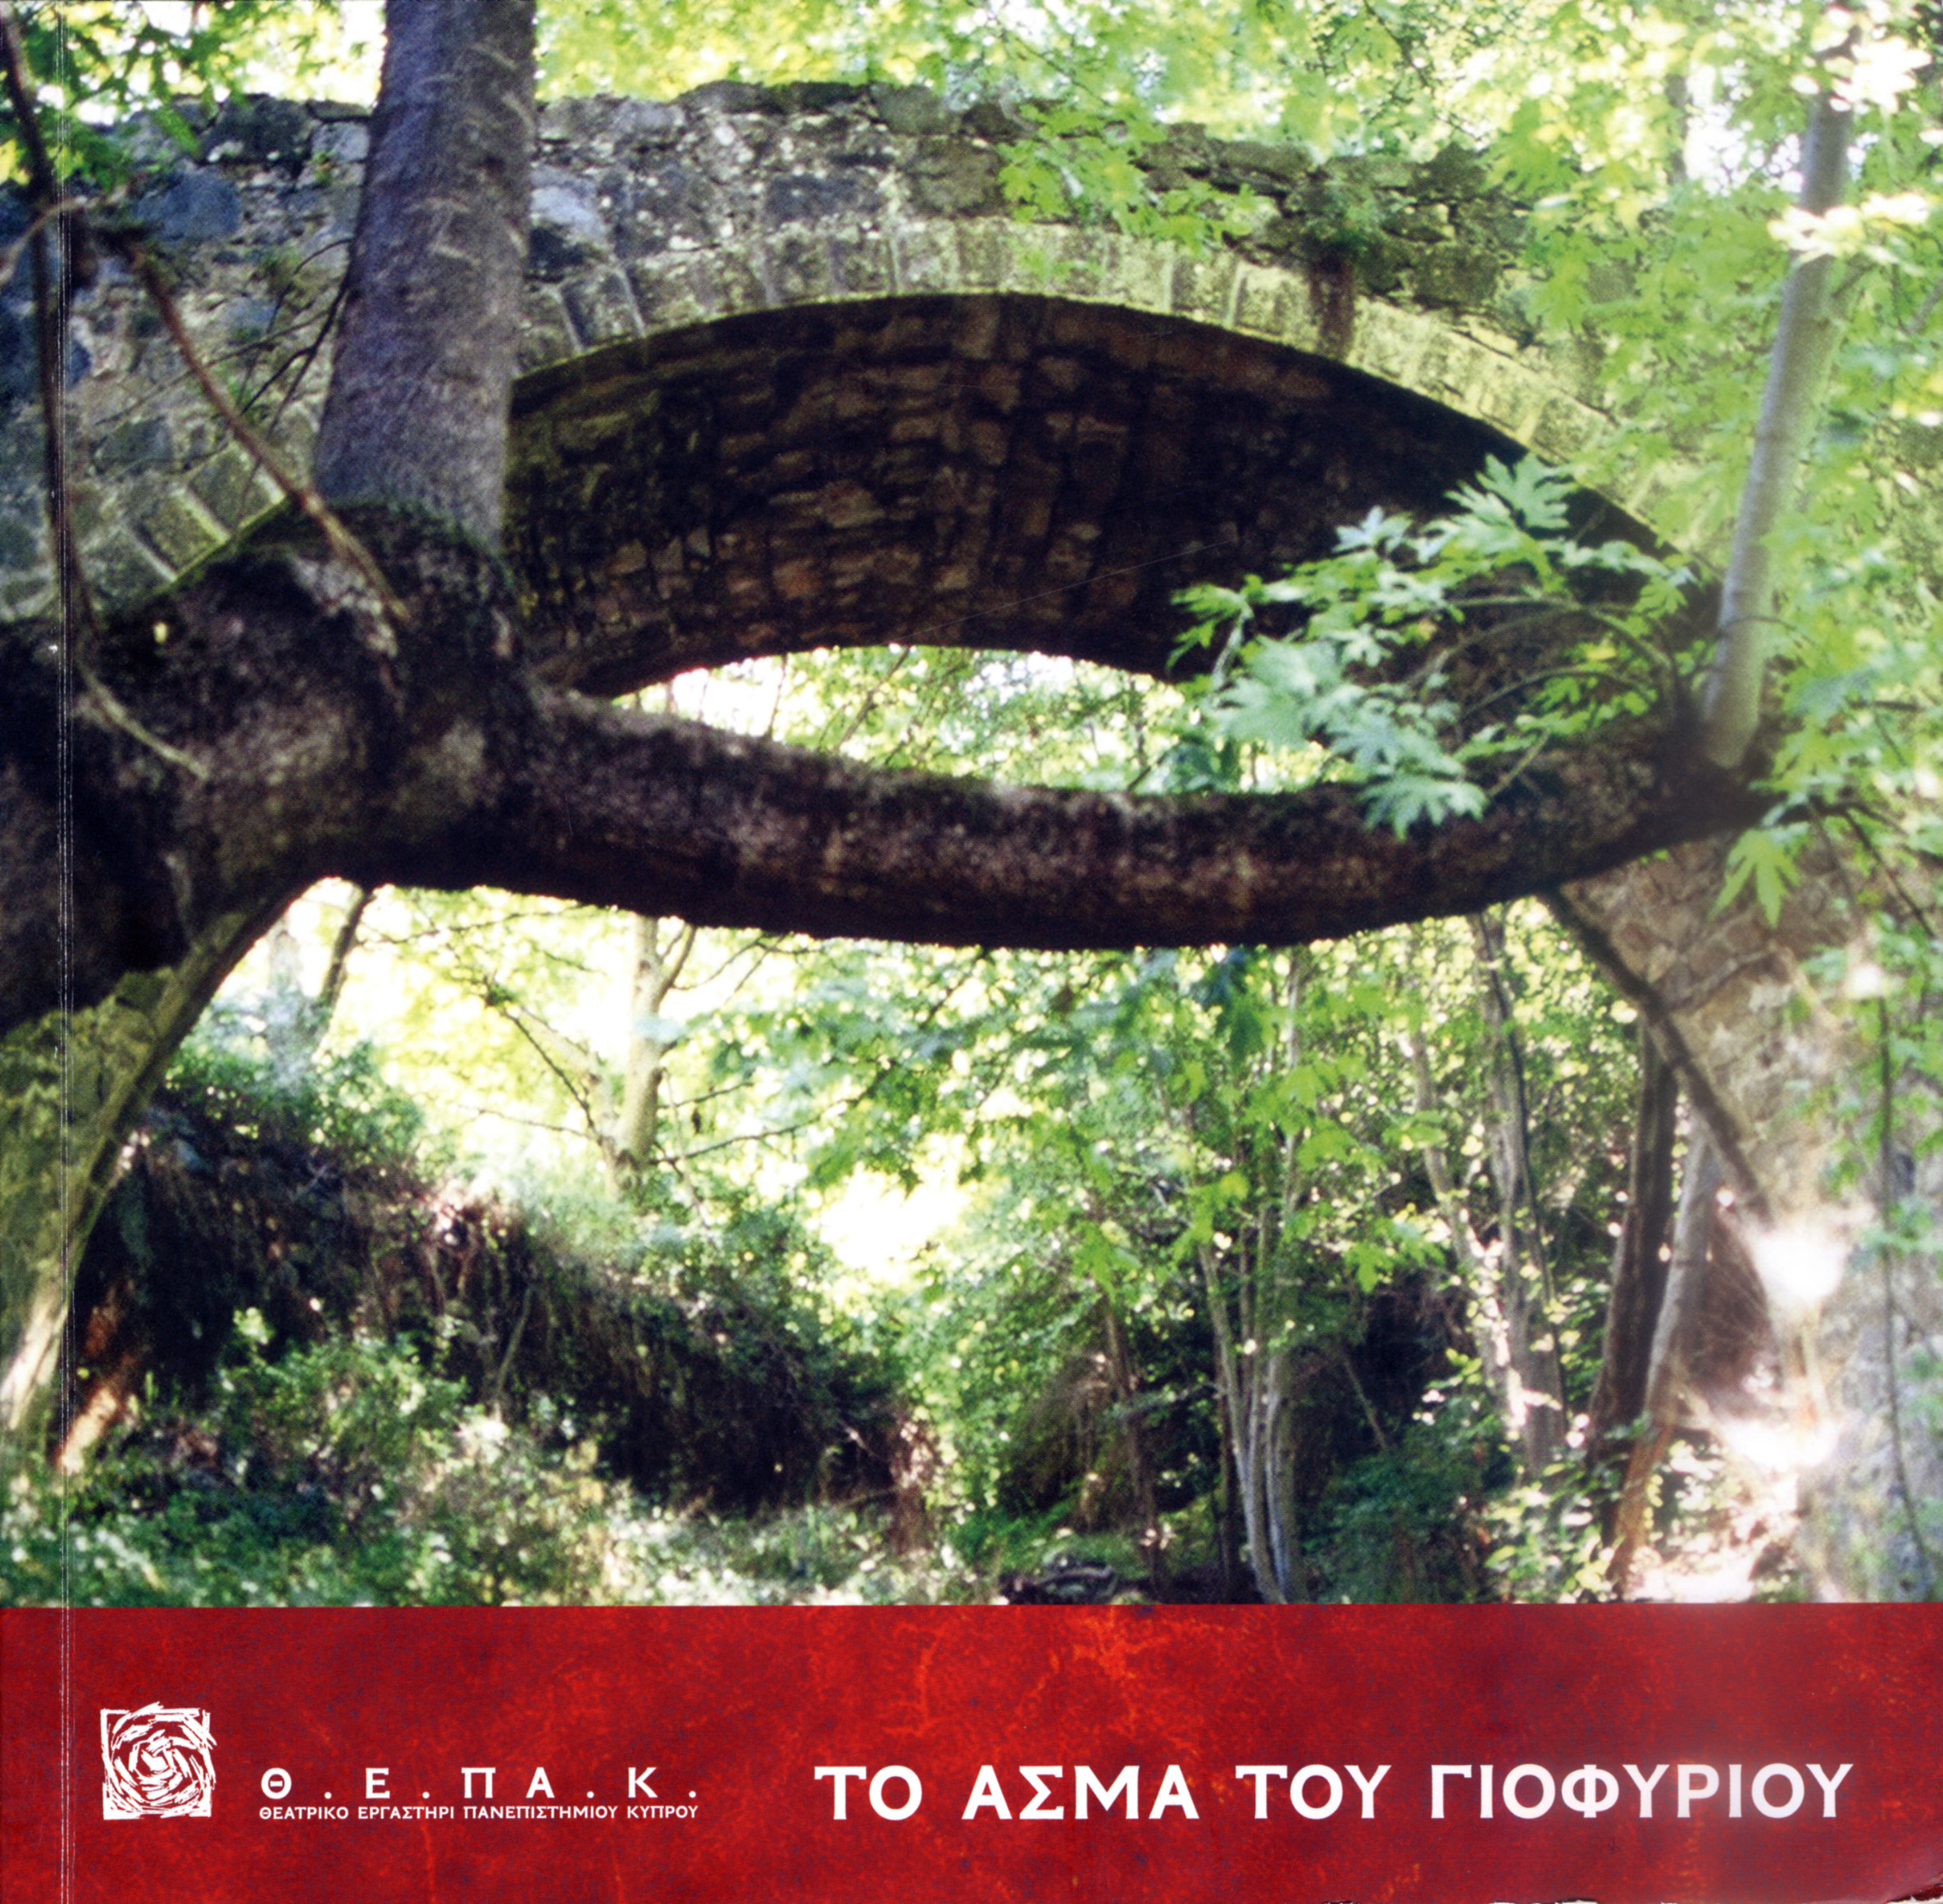 Asma-Booklet-Cover